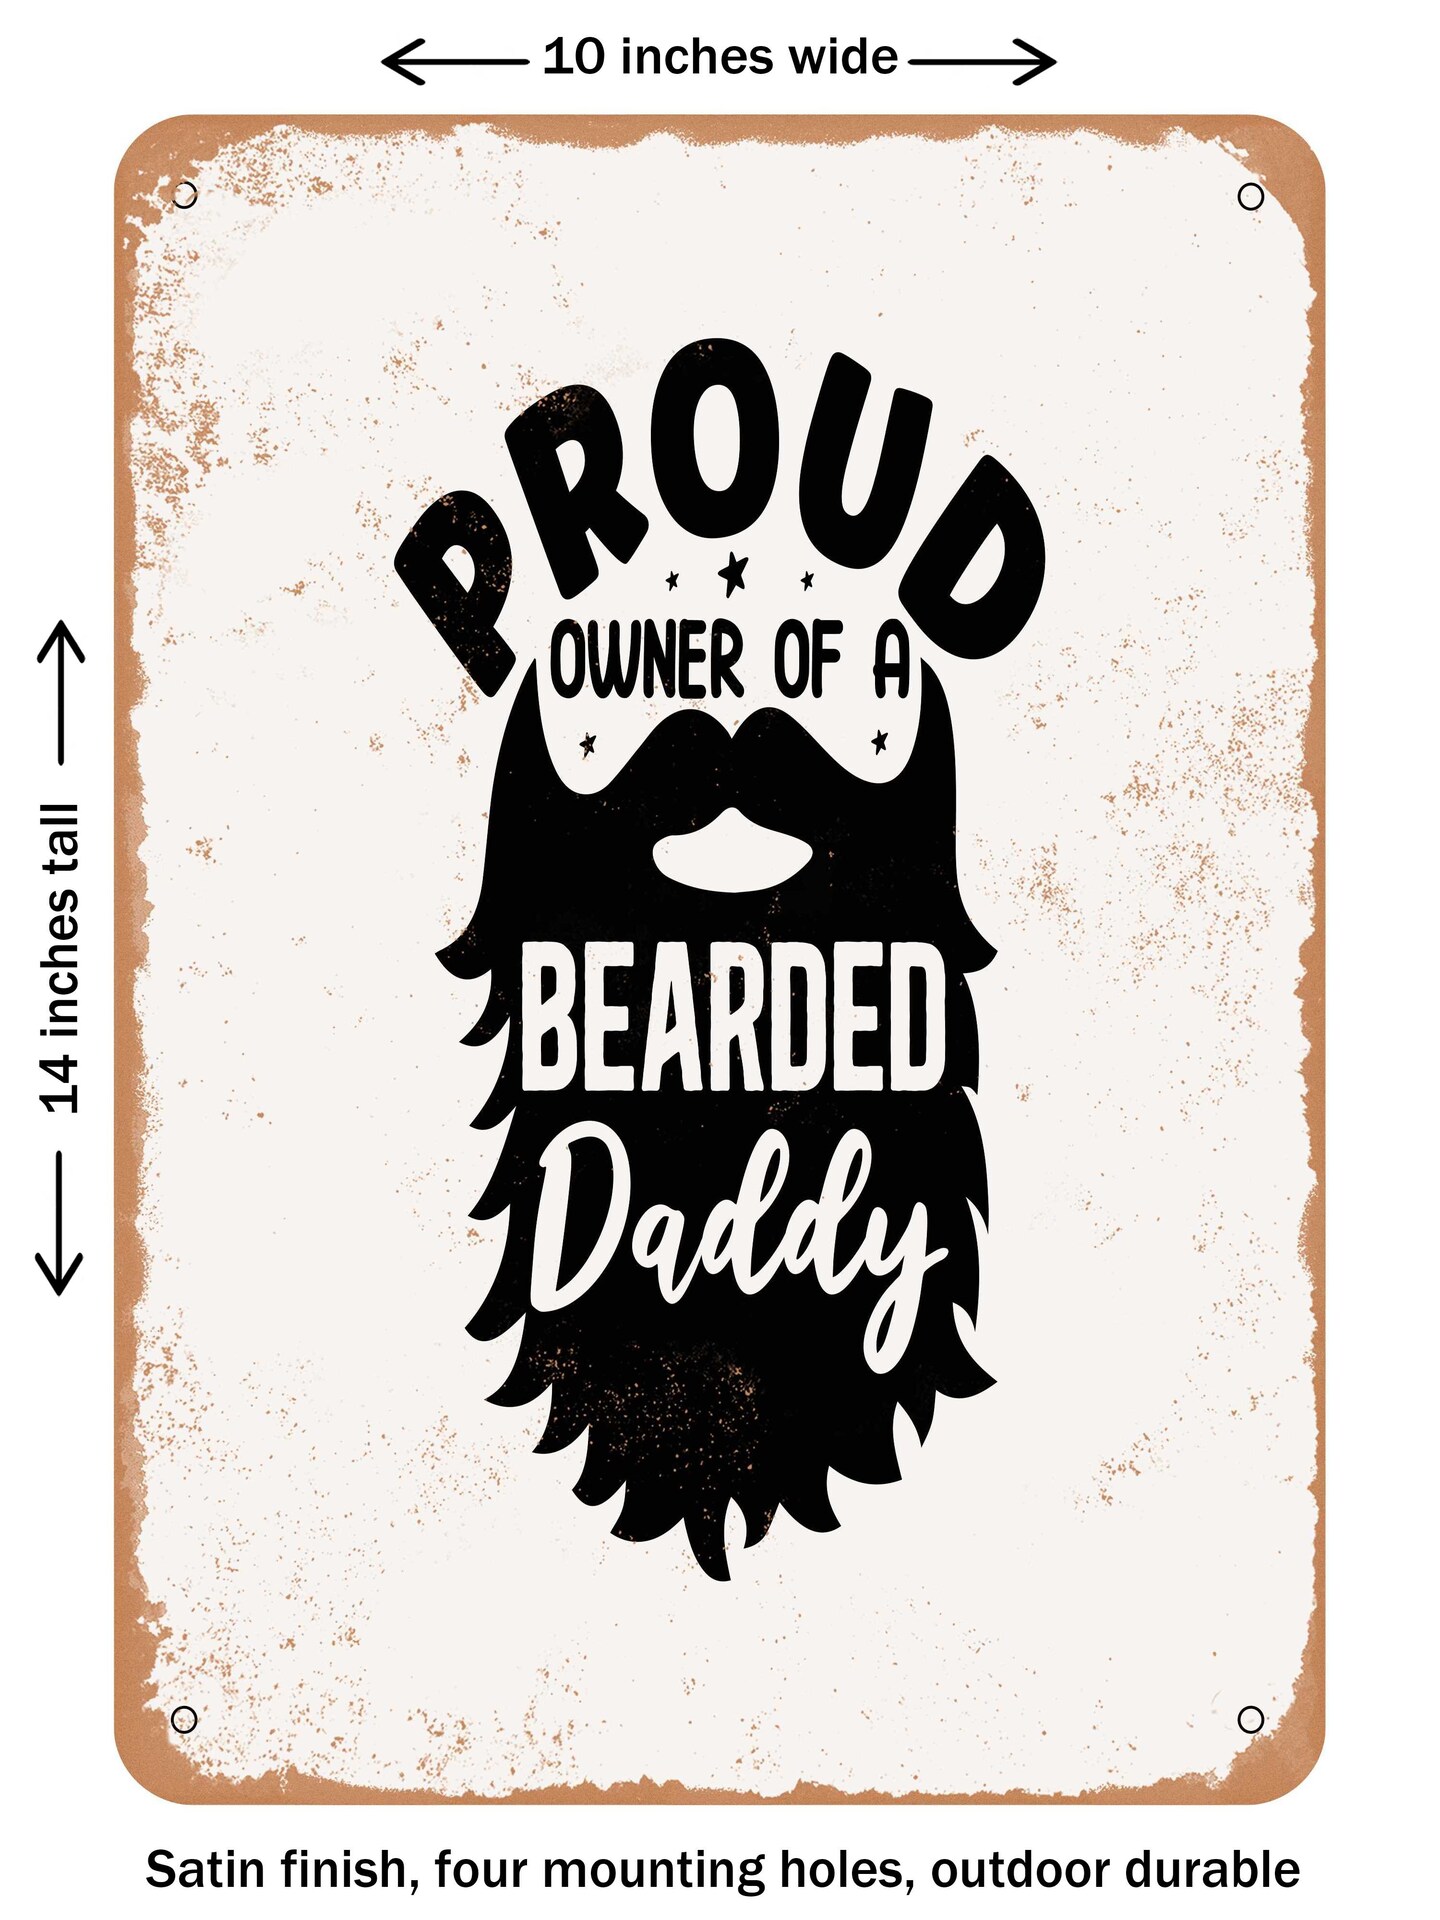 DECORATIVE METAL SIGN - Proud Owner of a Bearded Daddy - 2 - Vintage Rusty Look